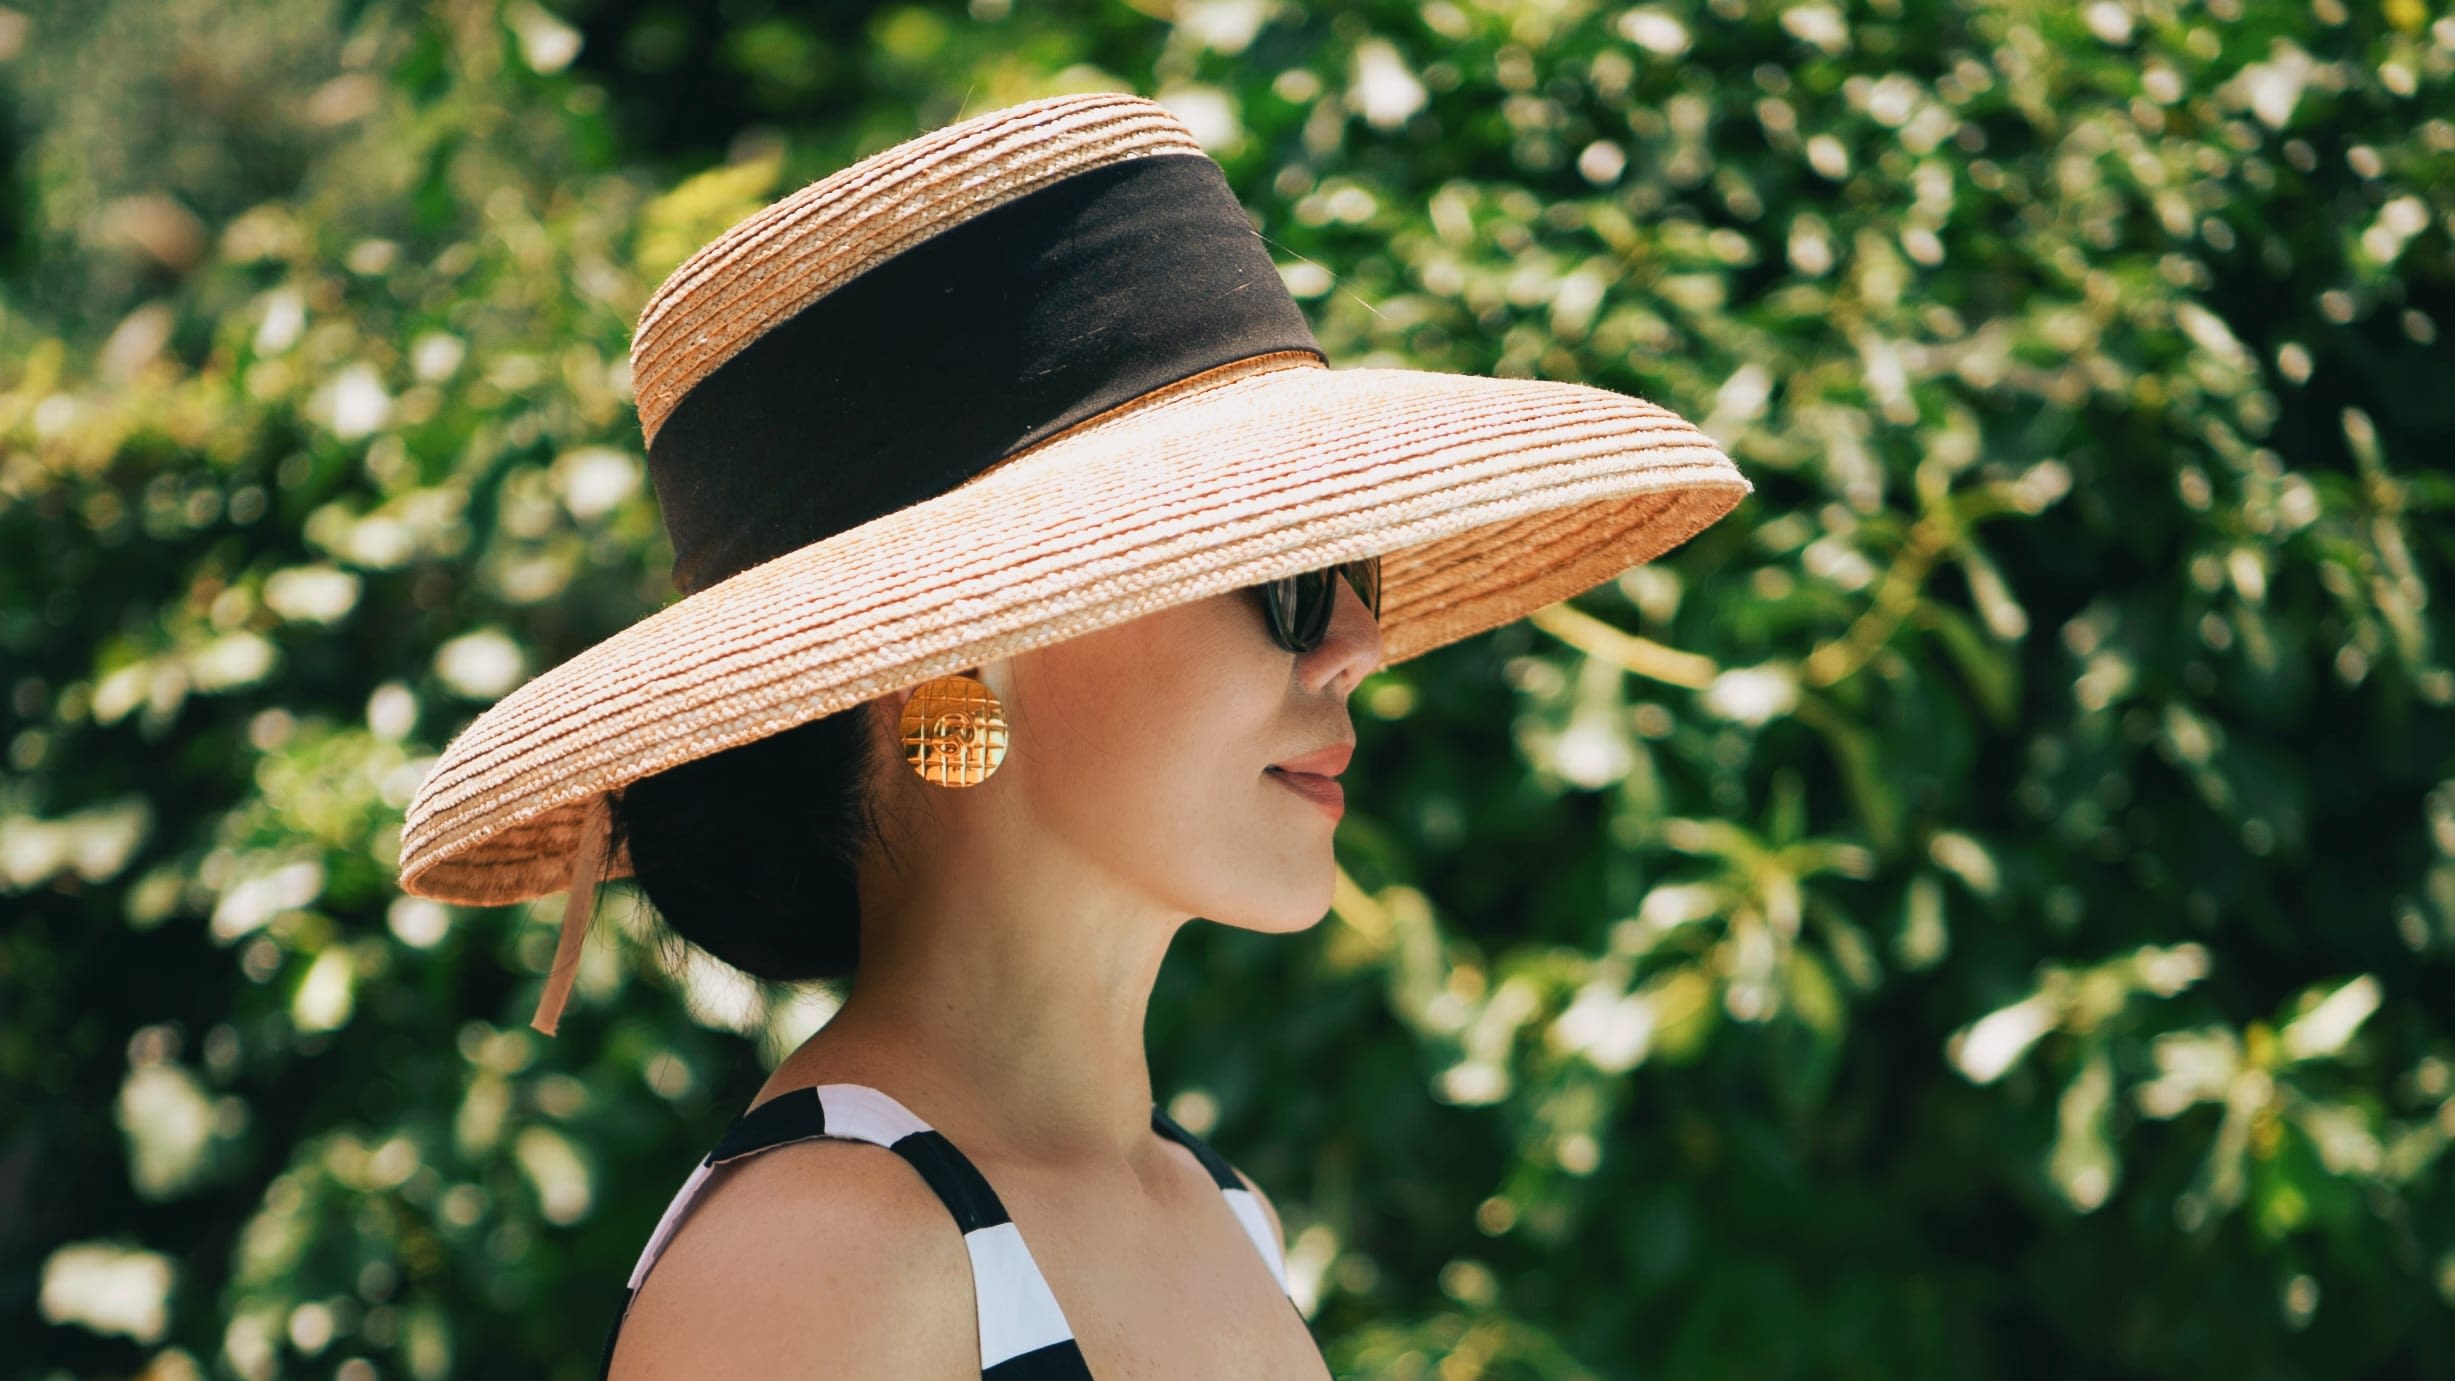 The hat lady: Which hat style is your favorite?